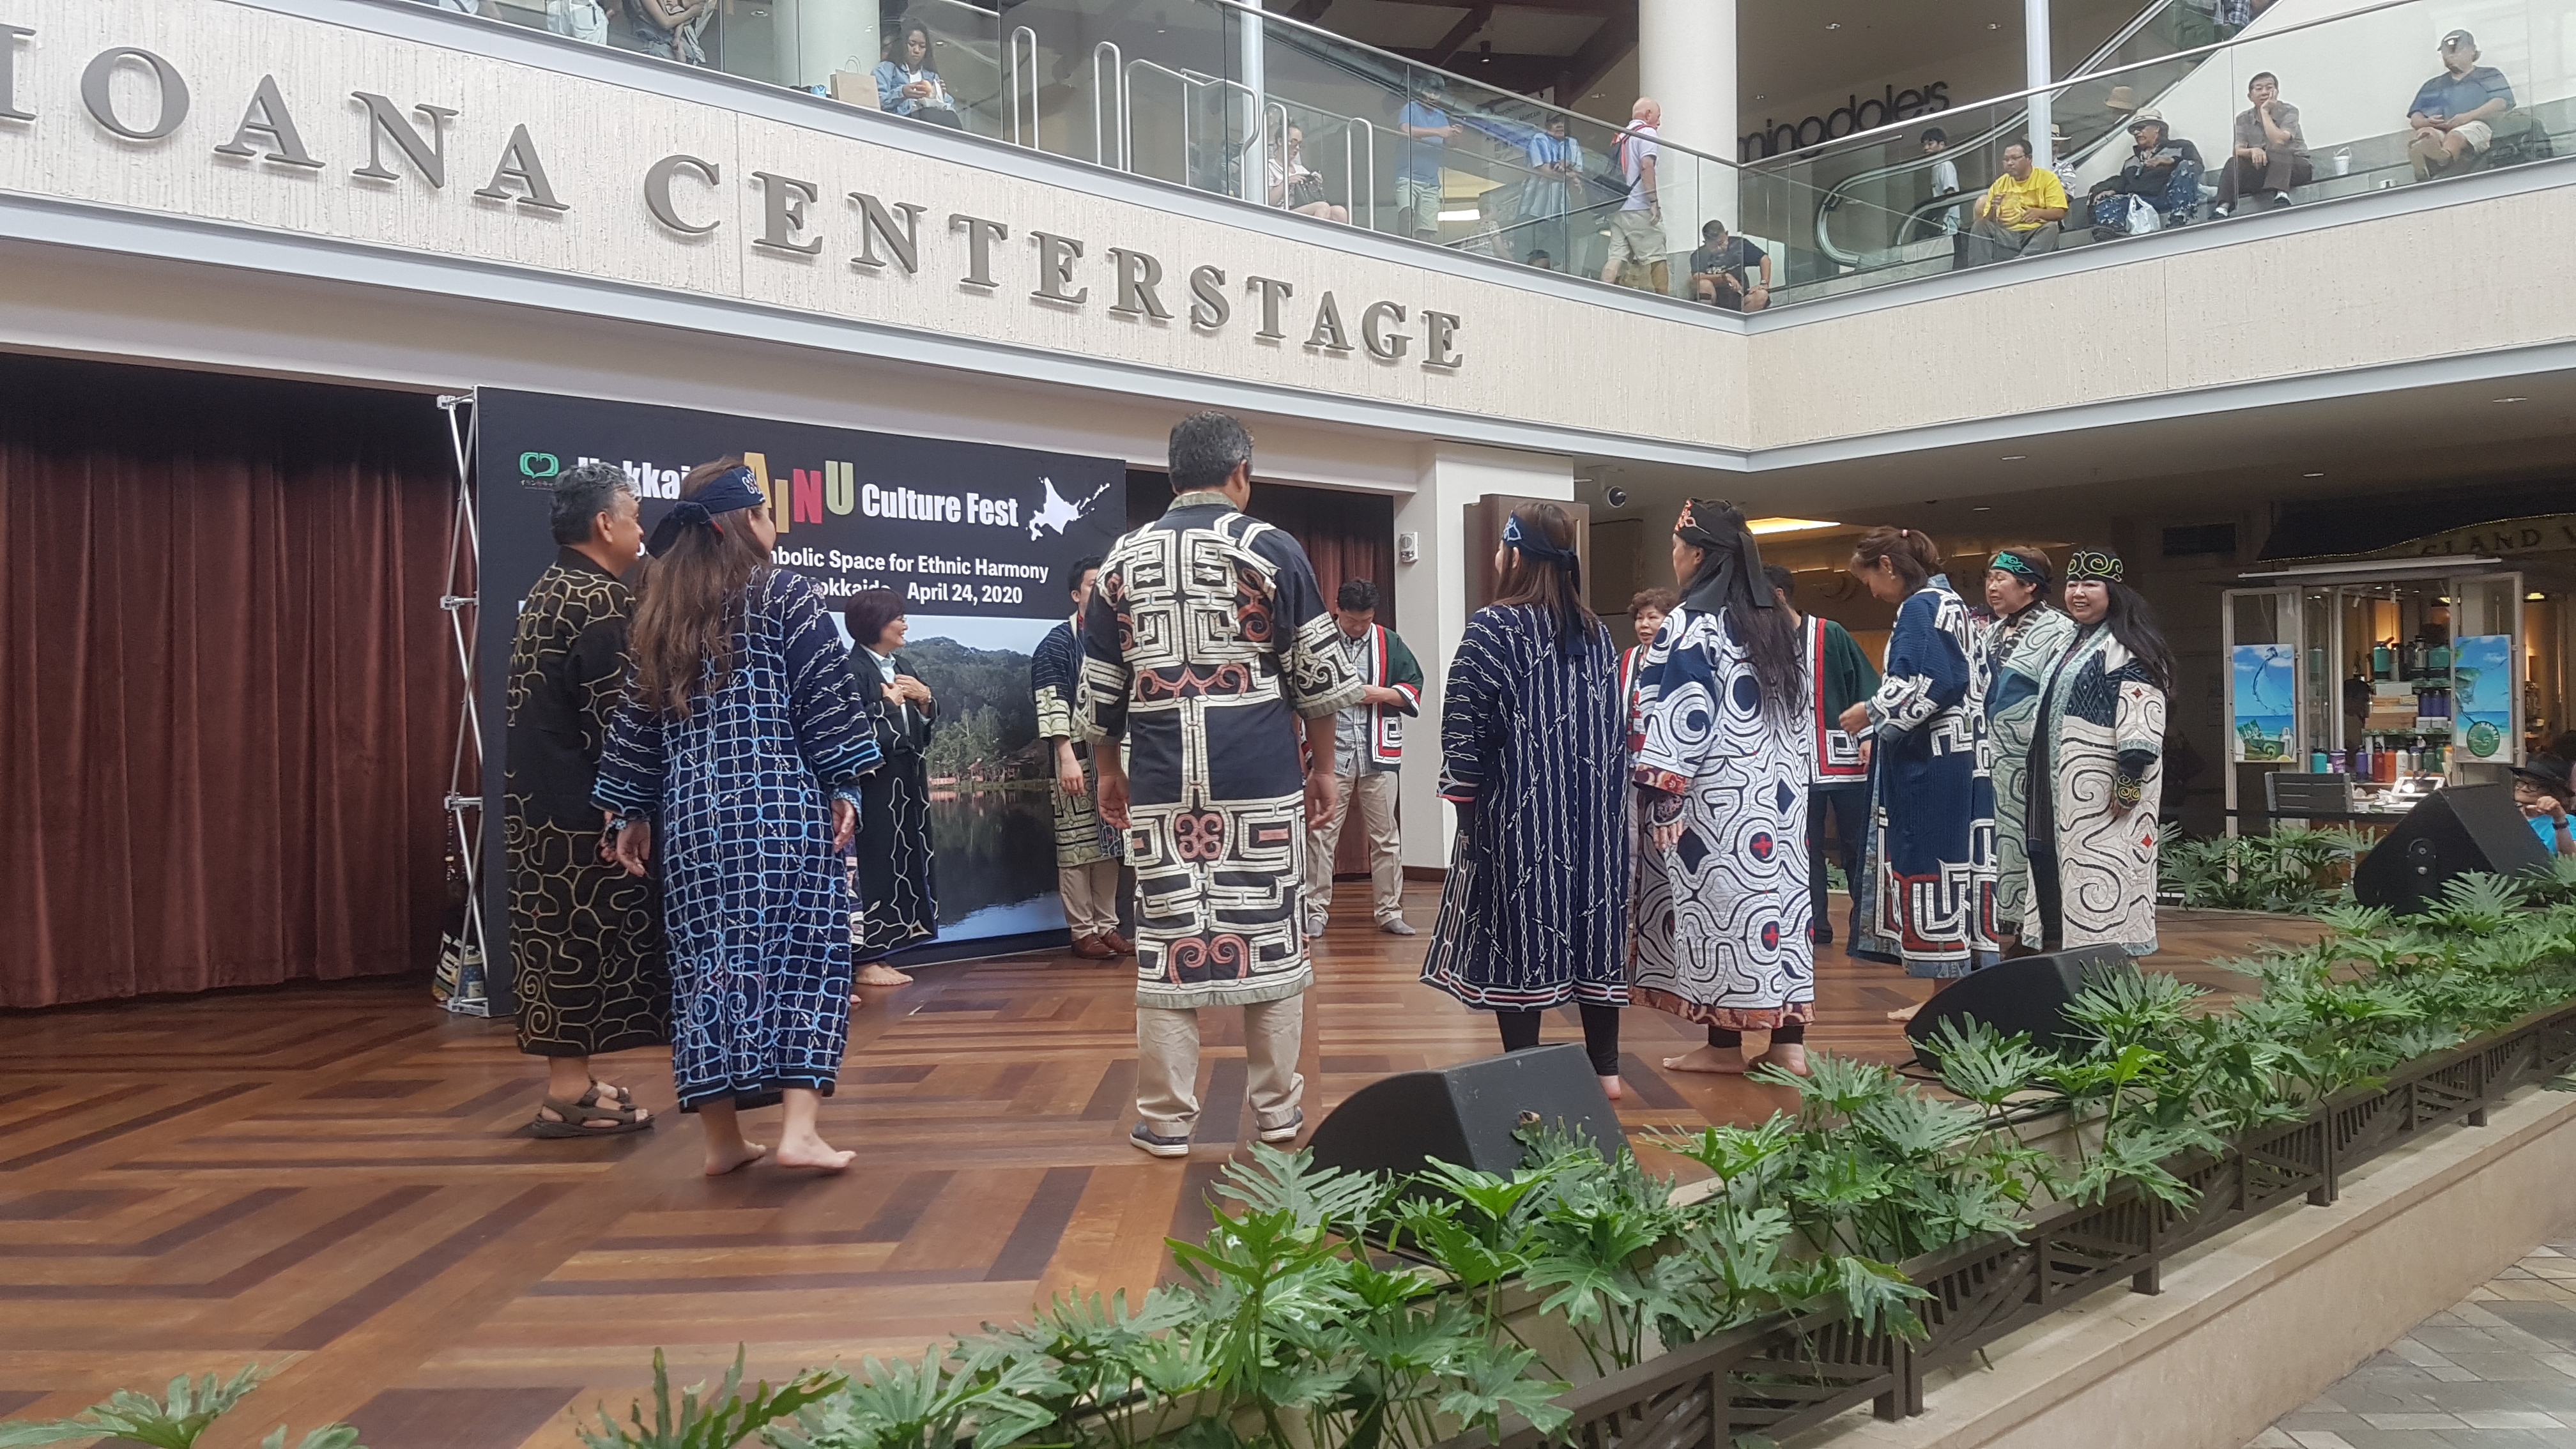 About thirteen men and women dressed in traditional embroidered dark blue robes form a circle on a wooden stage with the words "Ala Moana Centerstage" on the second floor overhang. The words are cut off and only "centerstage" can be seen. Some audience members are looking at the performance from the second floor of the mall.